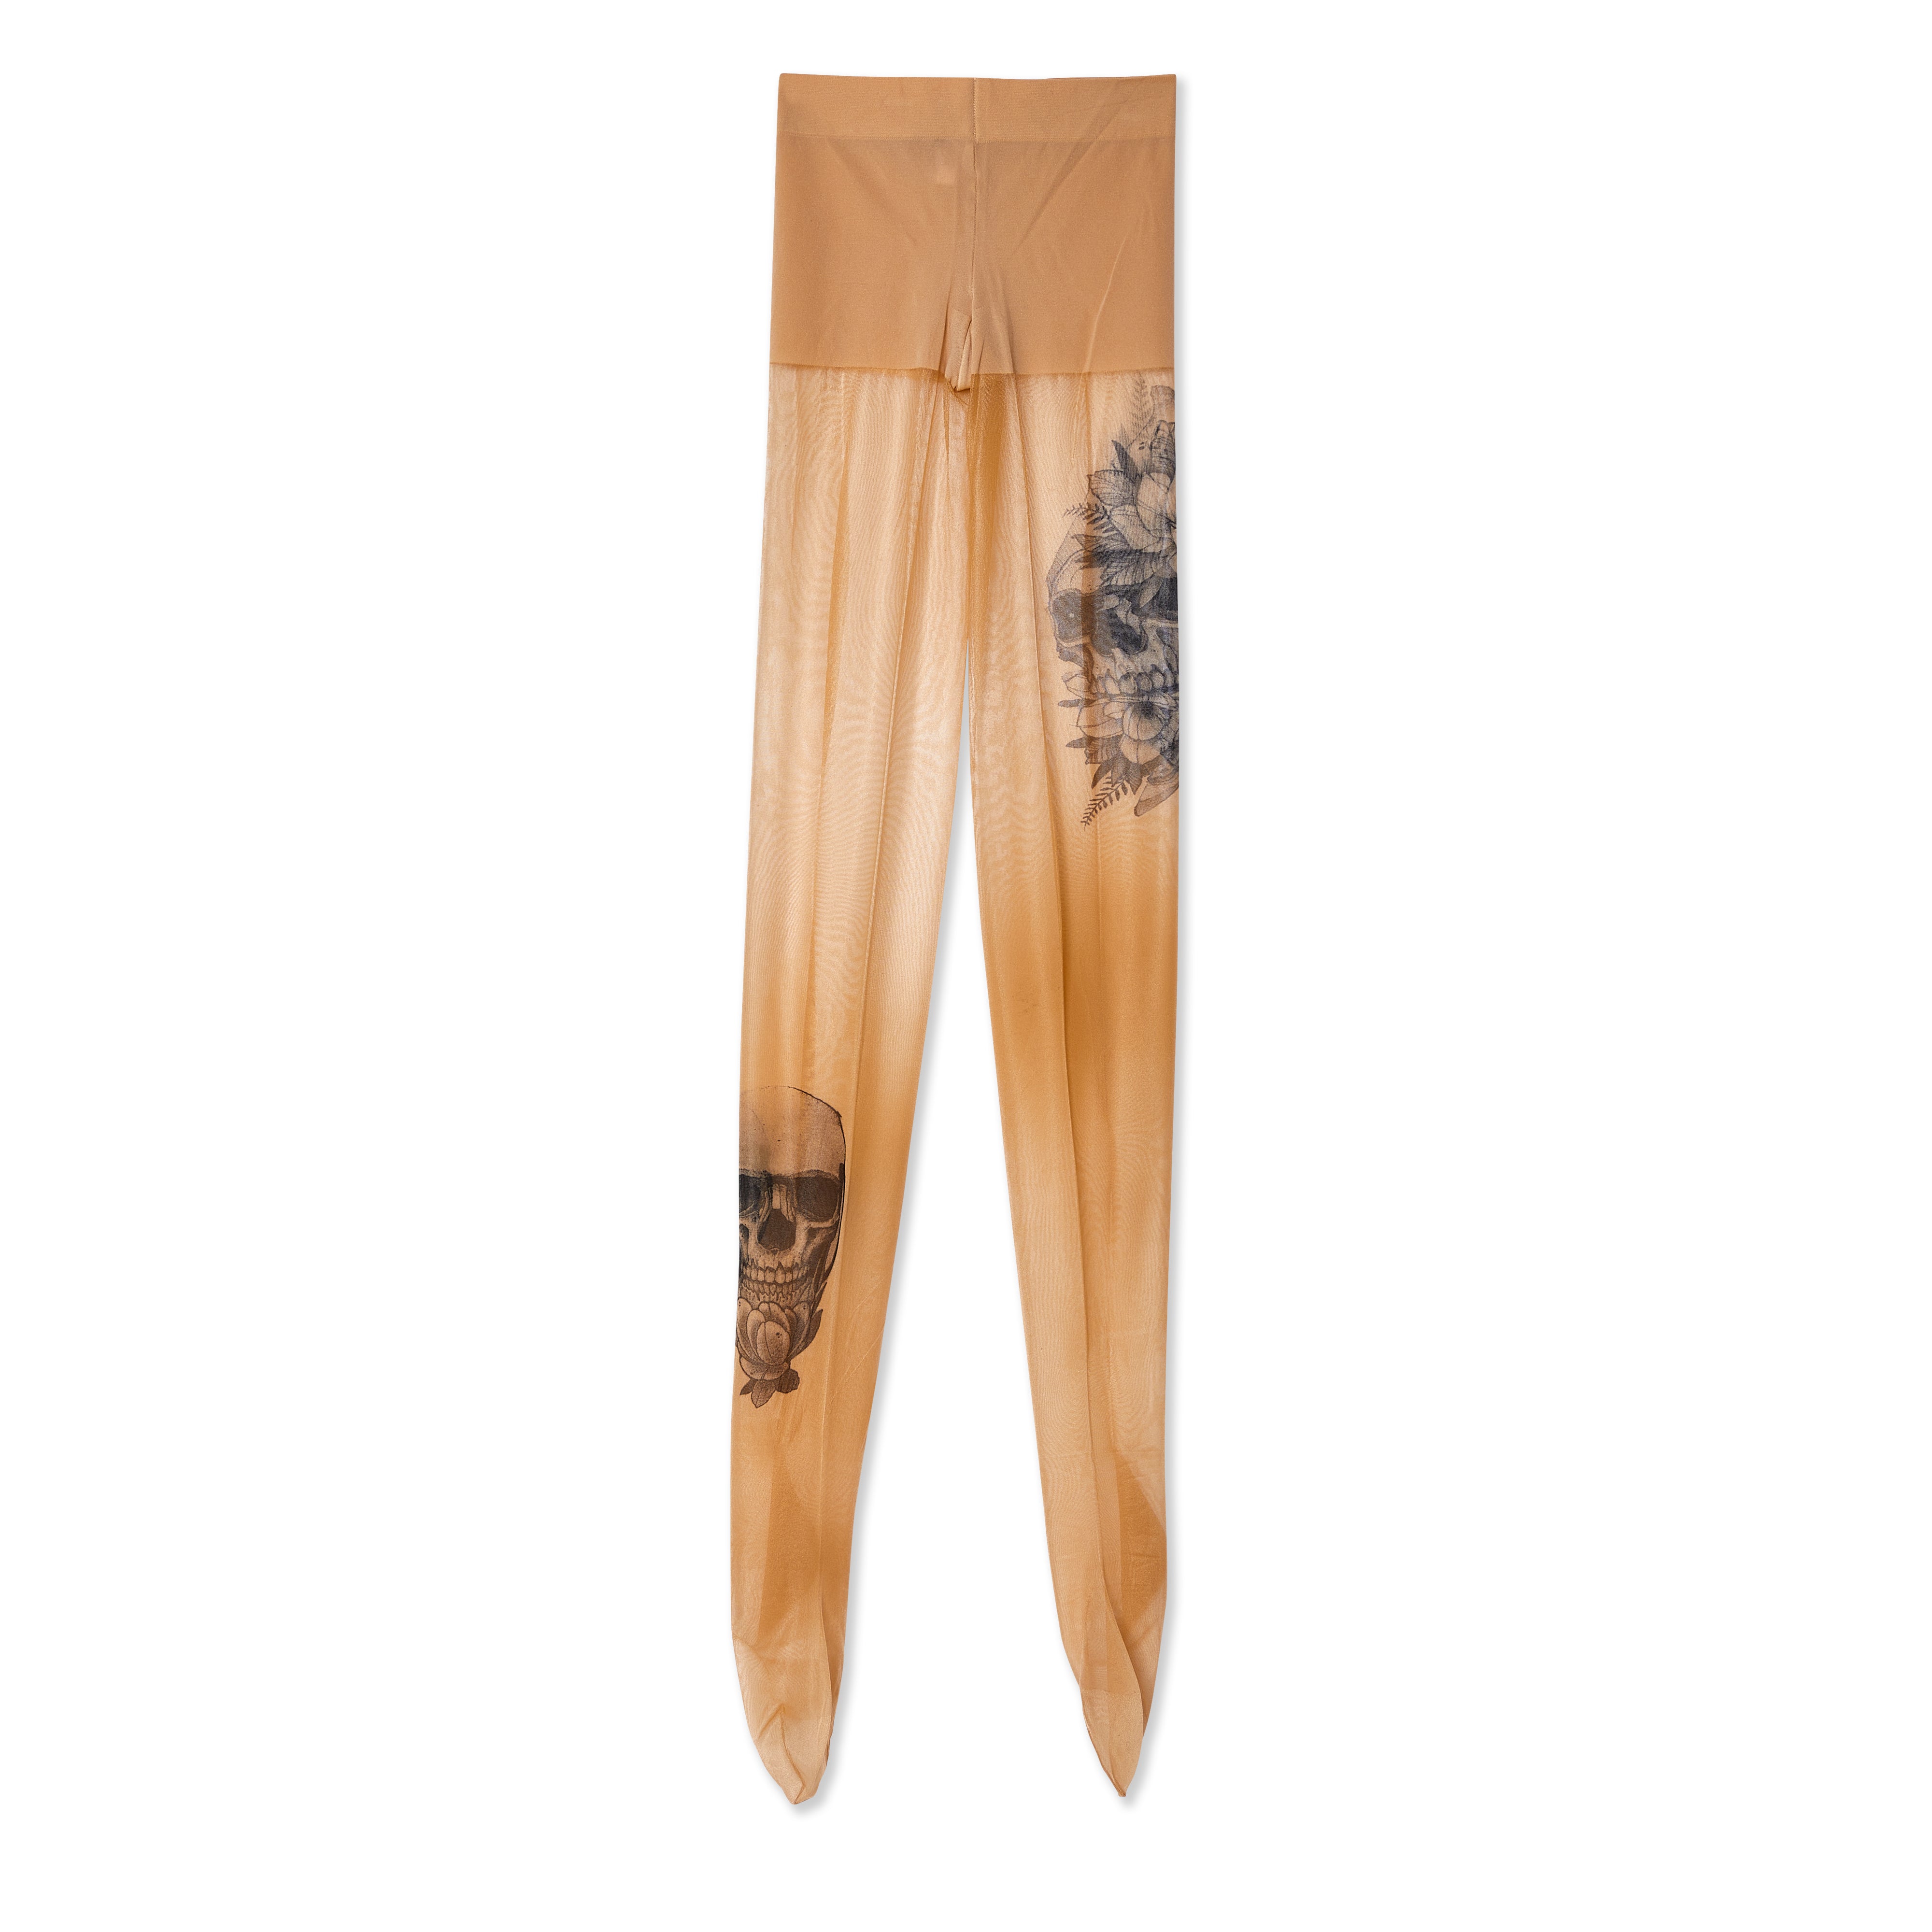 vetements tights - Buy vetements tights with free shipping on